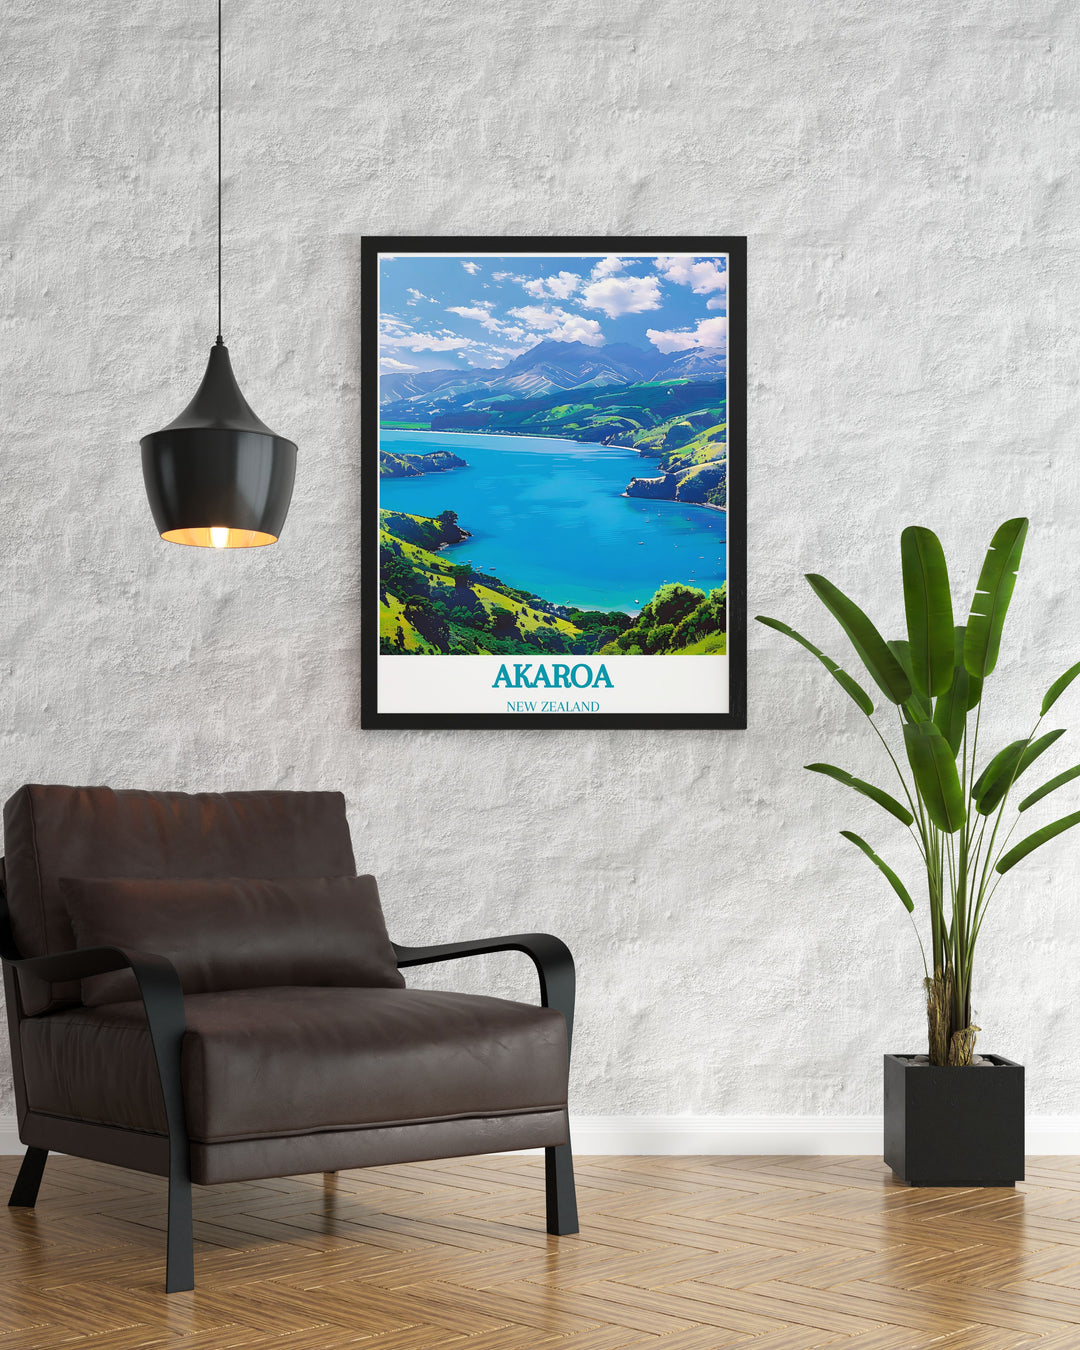 Fine art print capturing the serene beauty of Akaroa Harbour, perfect for adding a New Zealand touch to your decor.